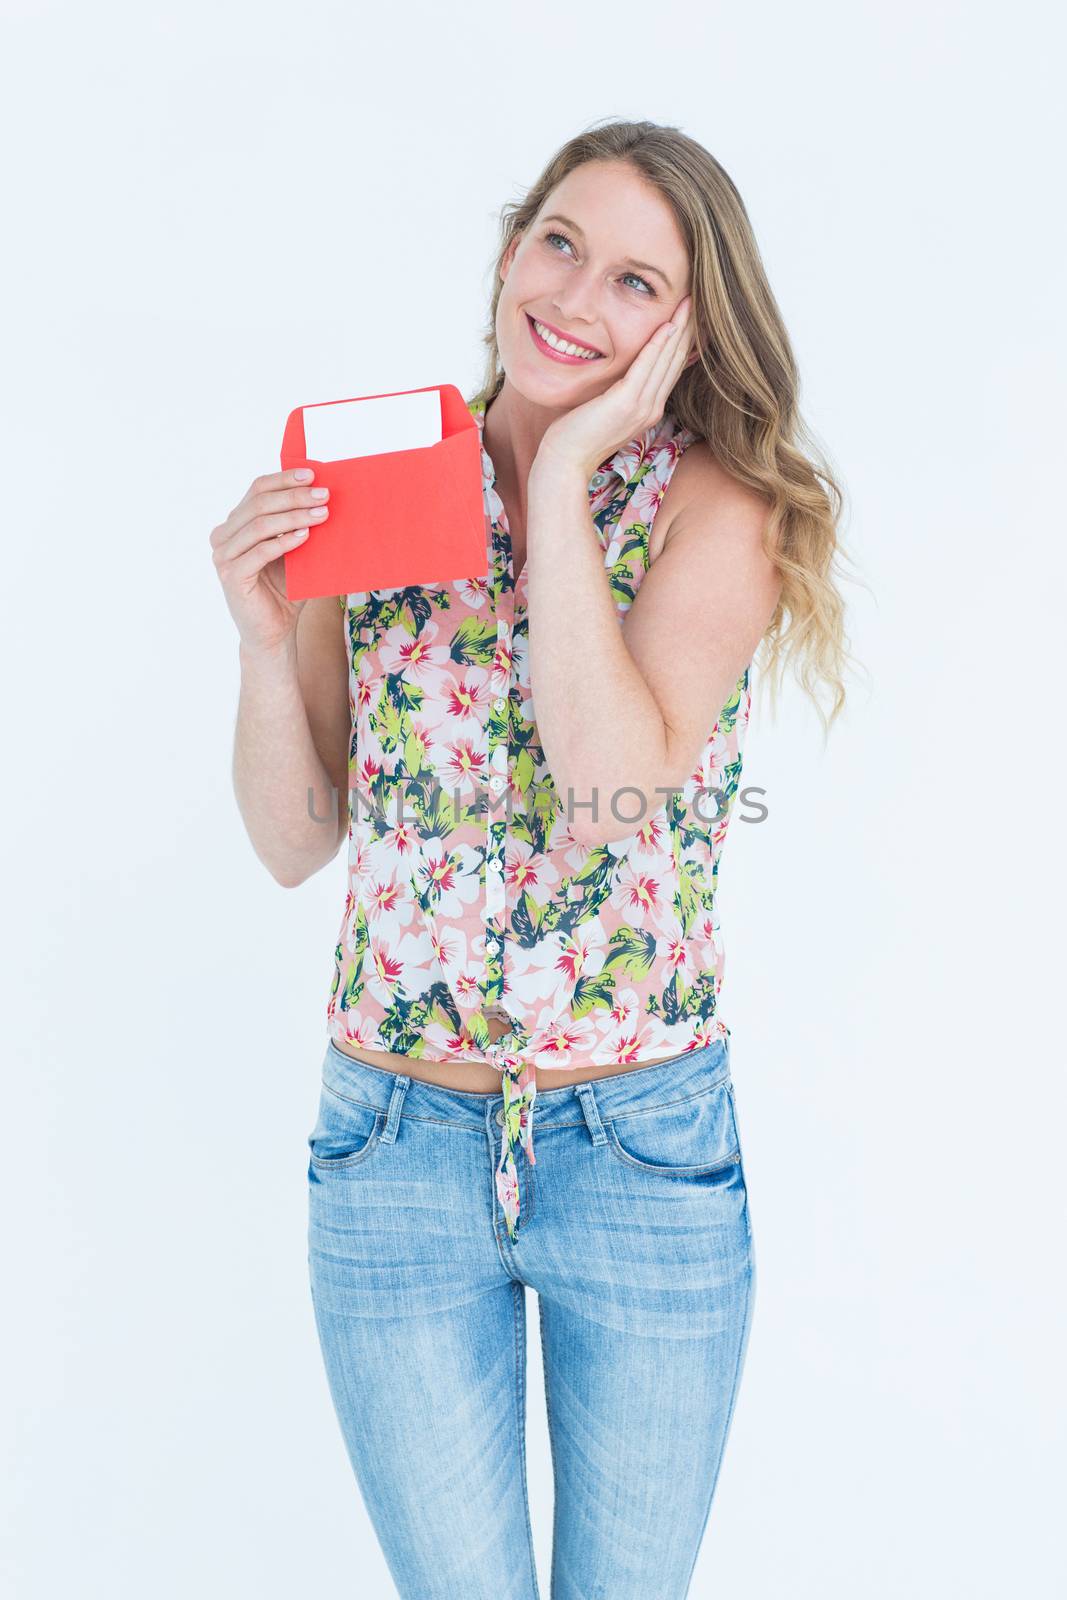 Smiling woman with letter  by Wavebreakmedia